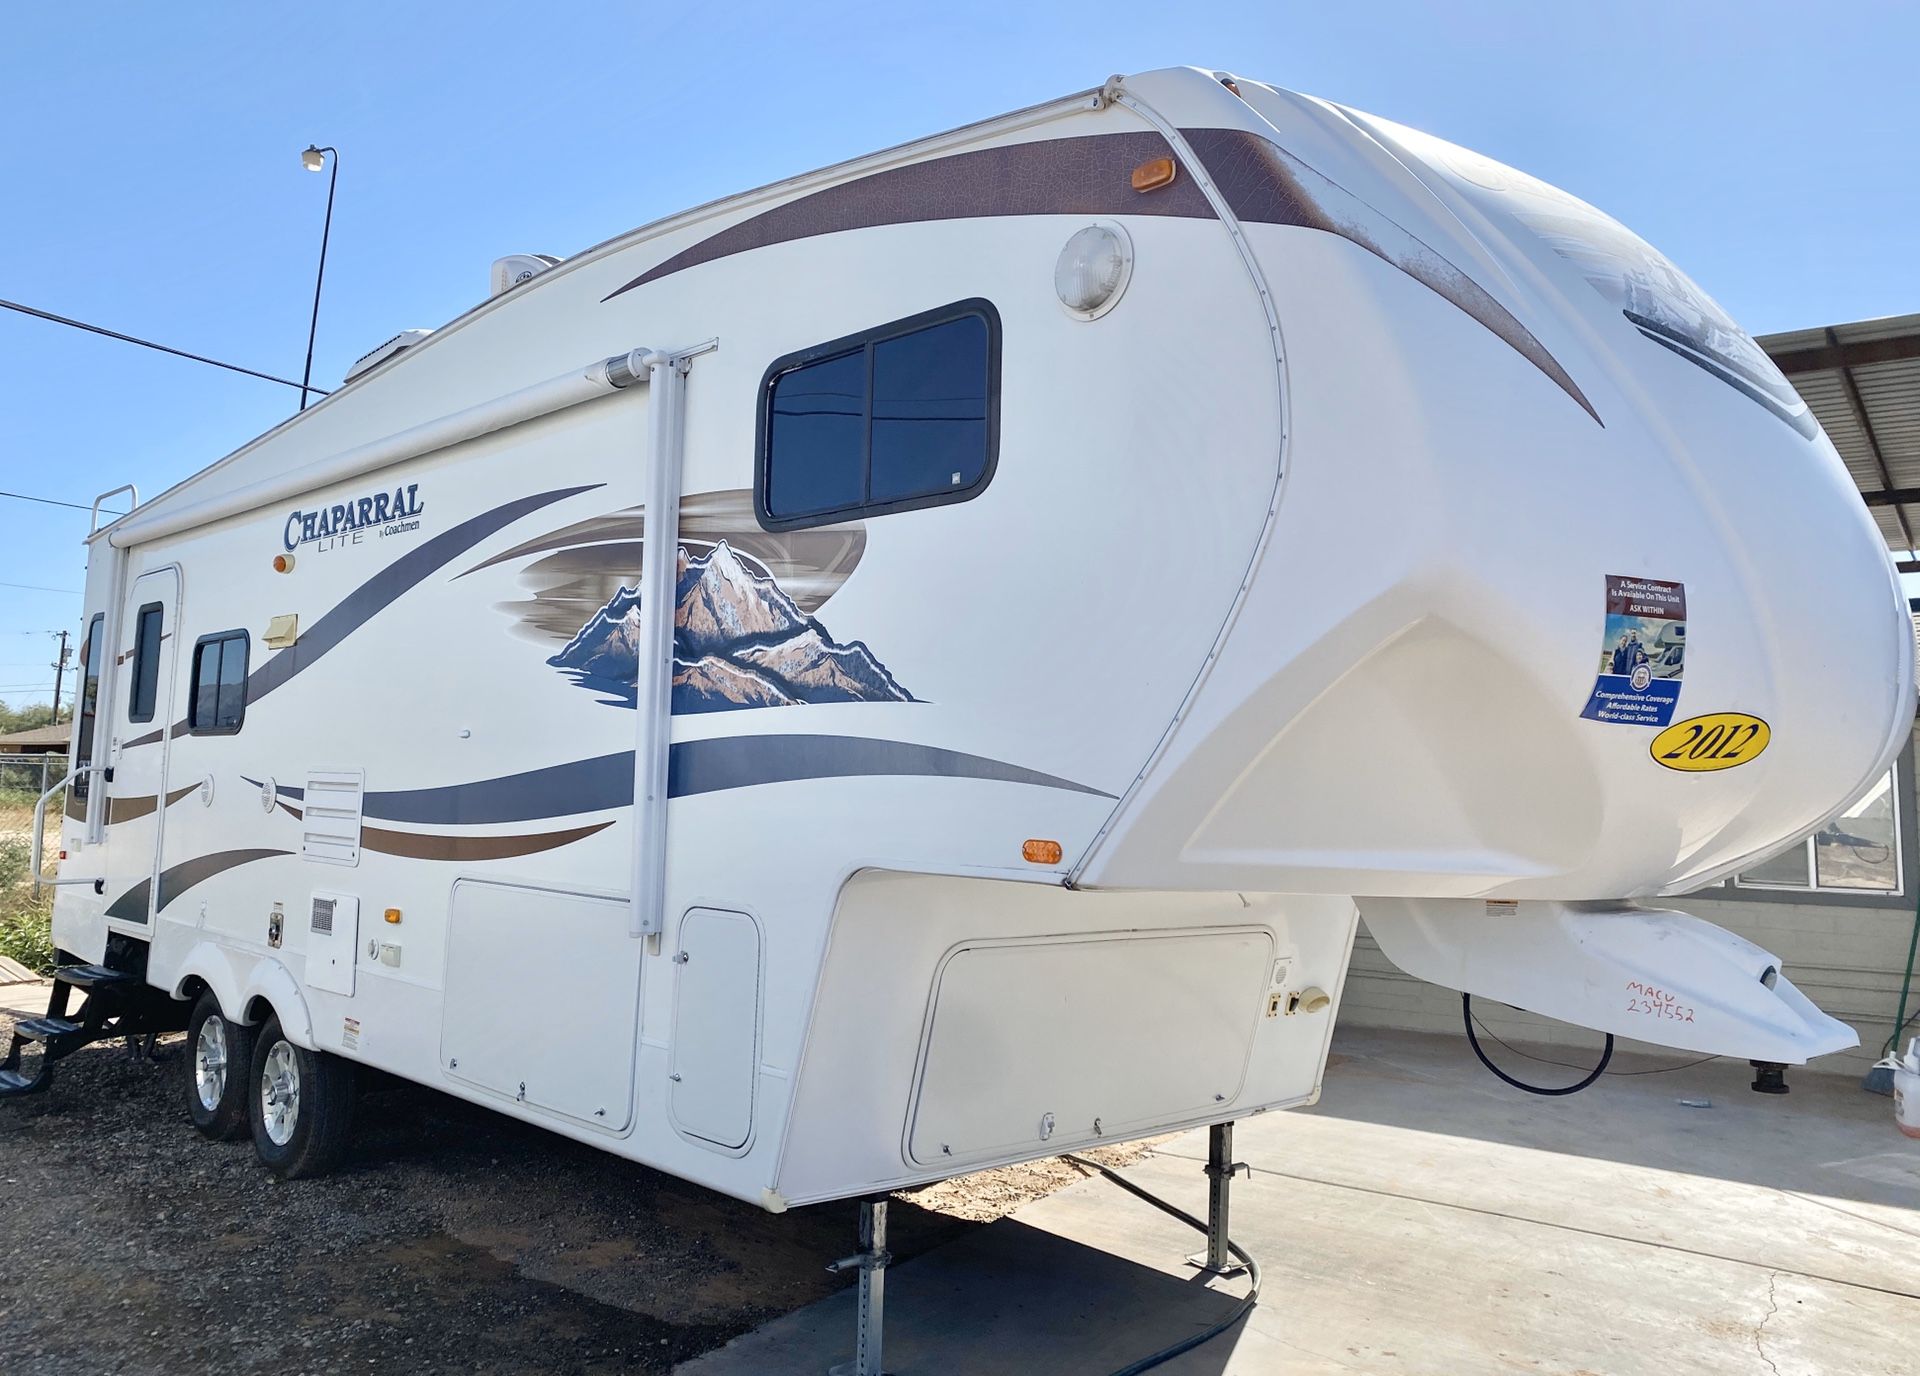 2012 Chaparral 29ft 5th wheel travel trailer